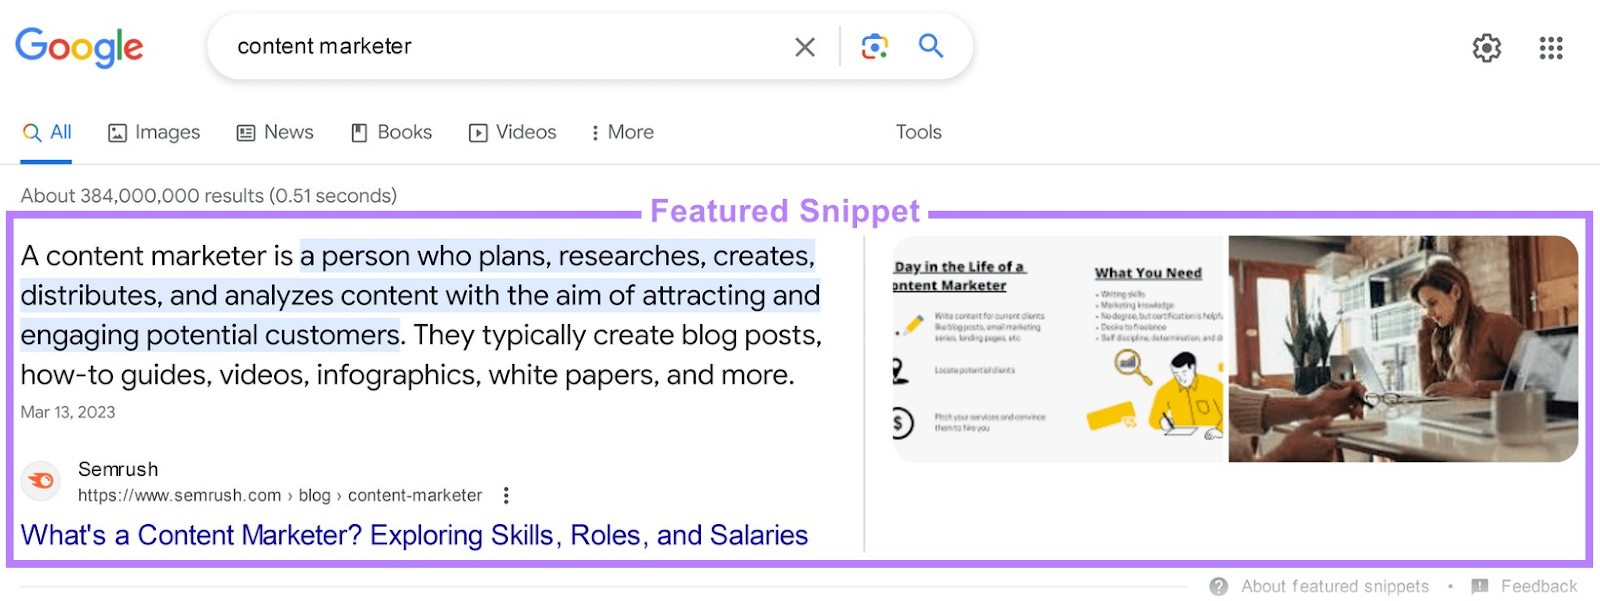 An example of a featured snippet